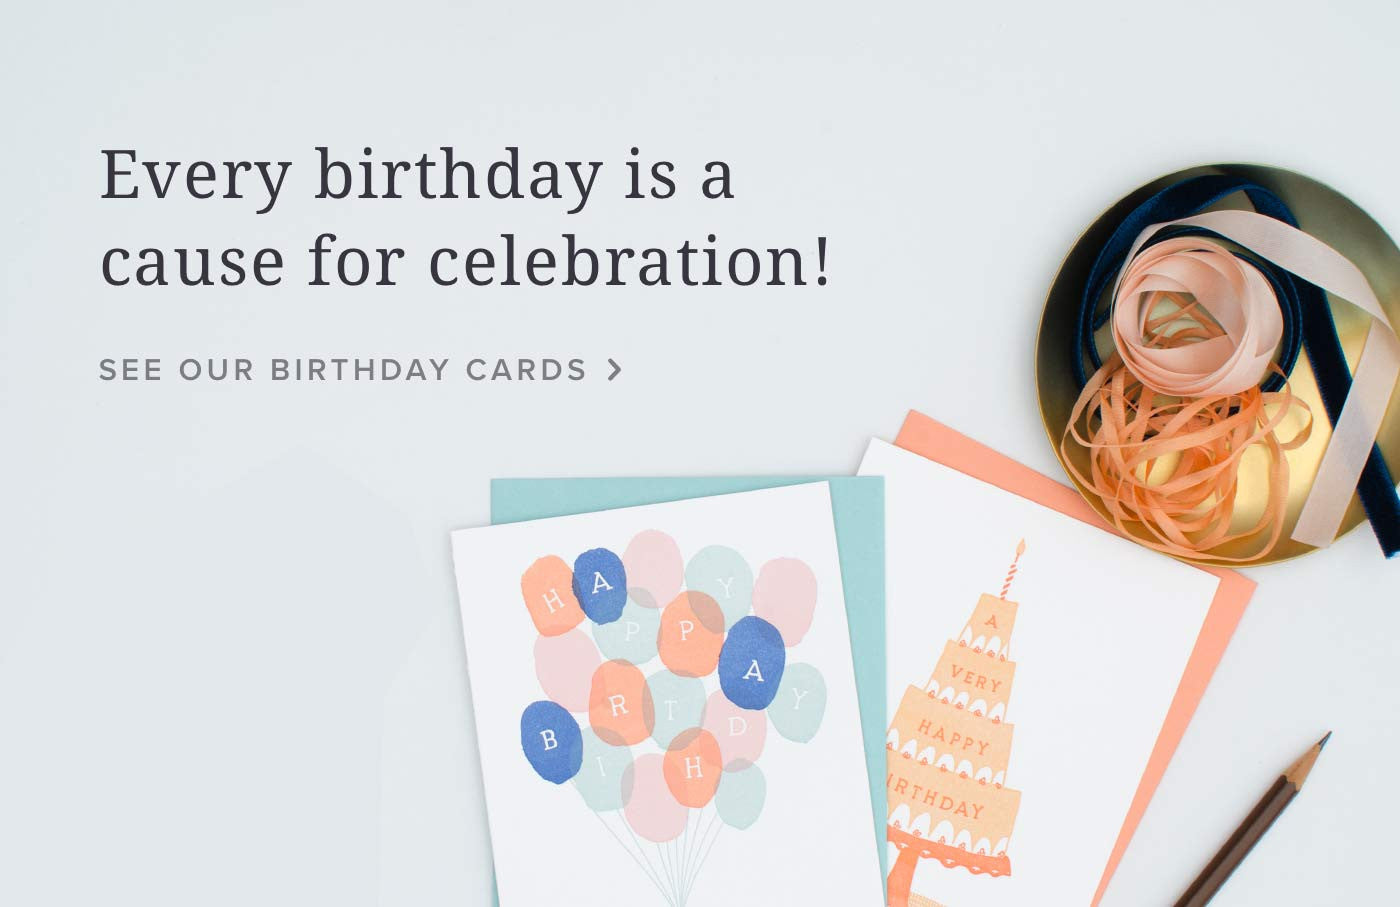 Every birthday is worth celebrating! See Our Birthday Cards.